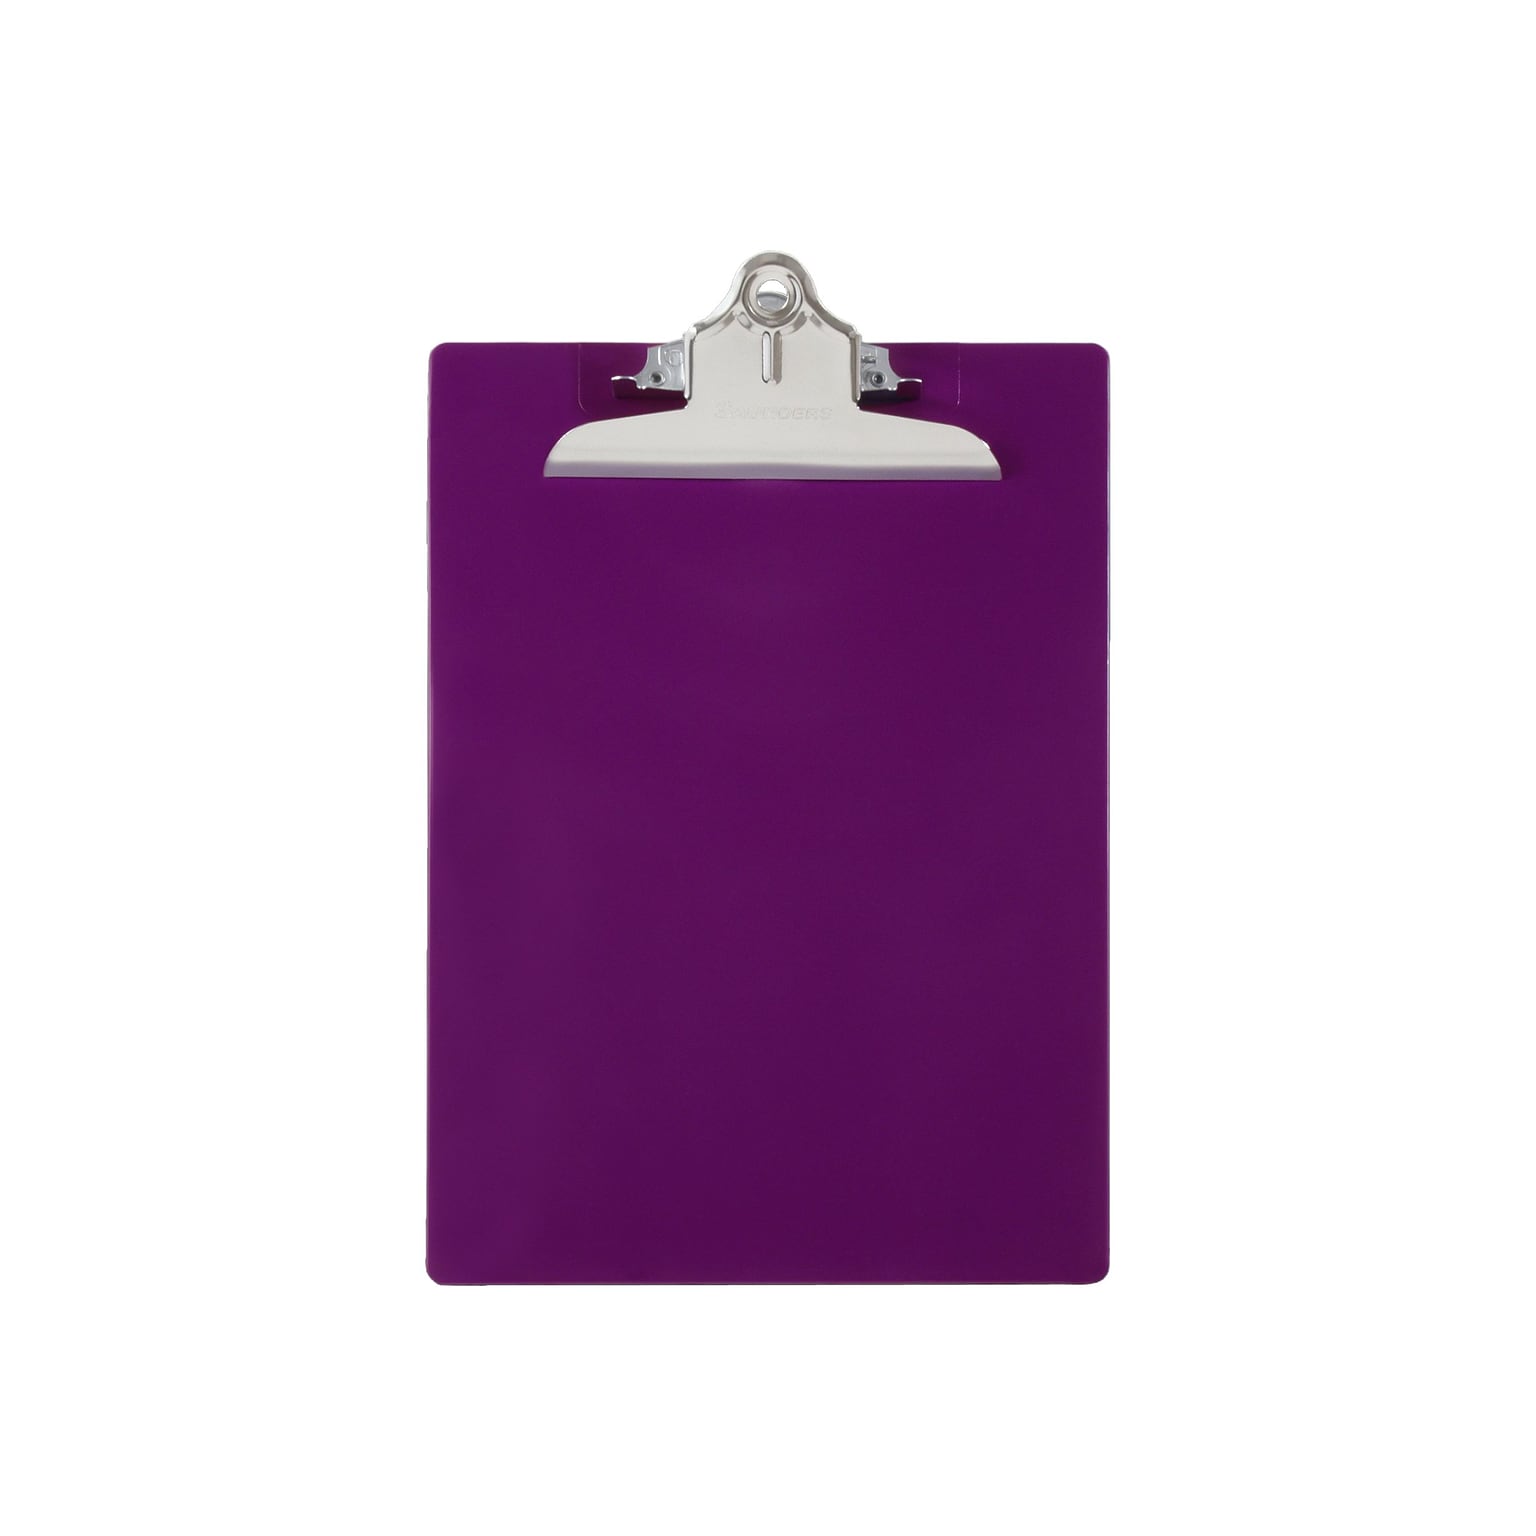 Saunders Recycled Plastic Clipboard, Letter Size, Purple (21606)